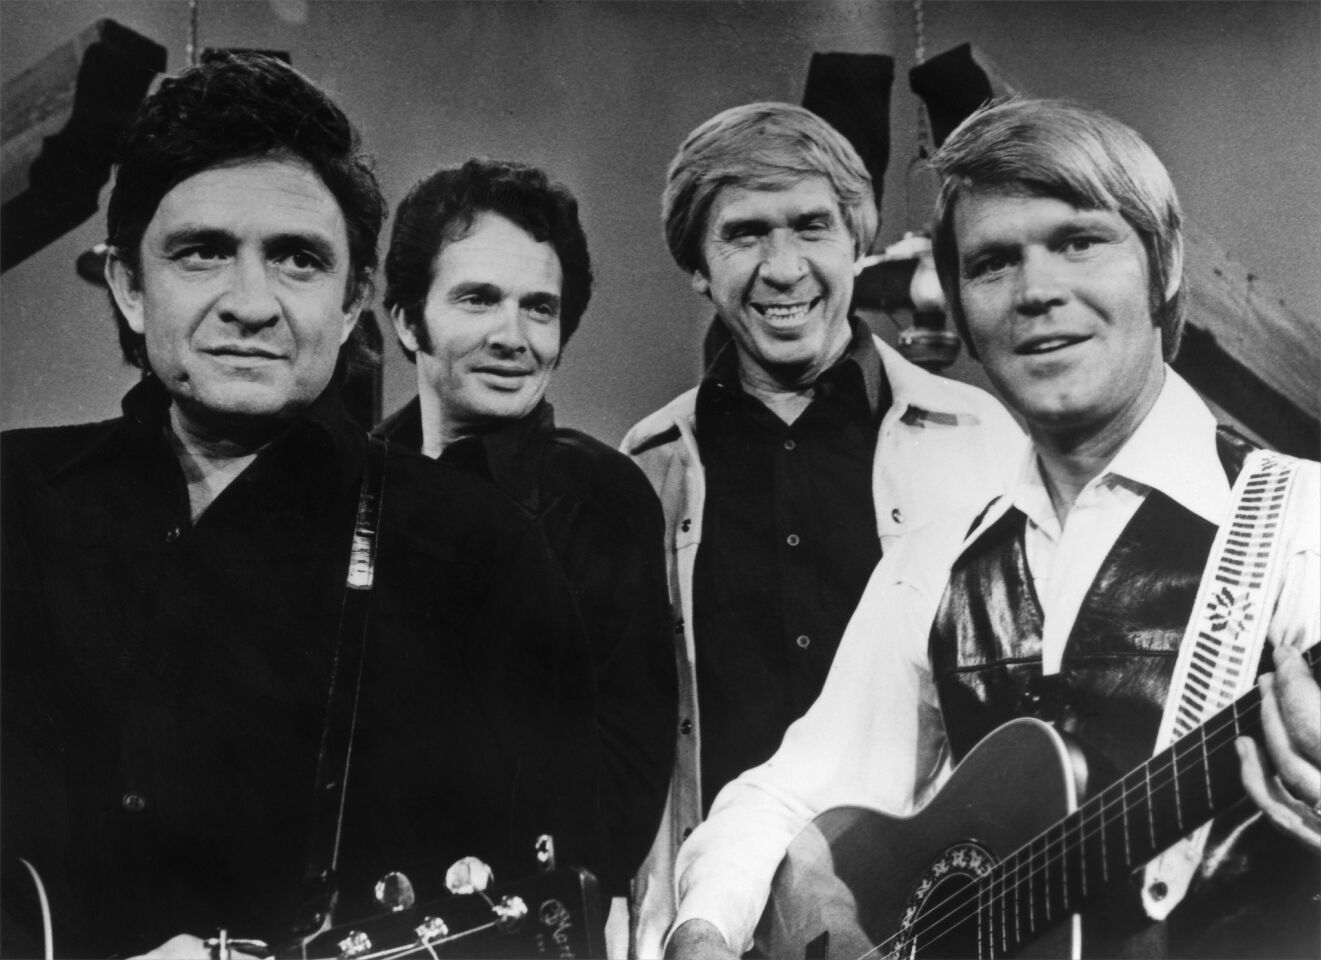 Johnny Cash, Merle Haggard, Buck Owens and Glen Campbell perform on a TV show in the mid-1970s.